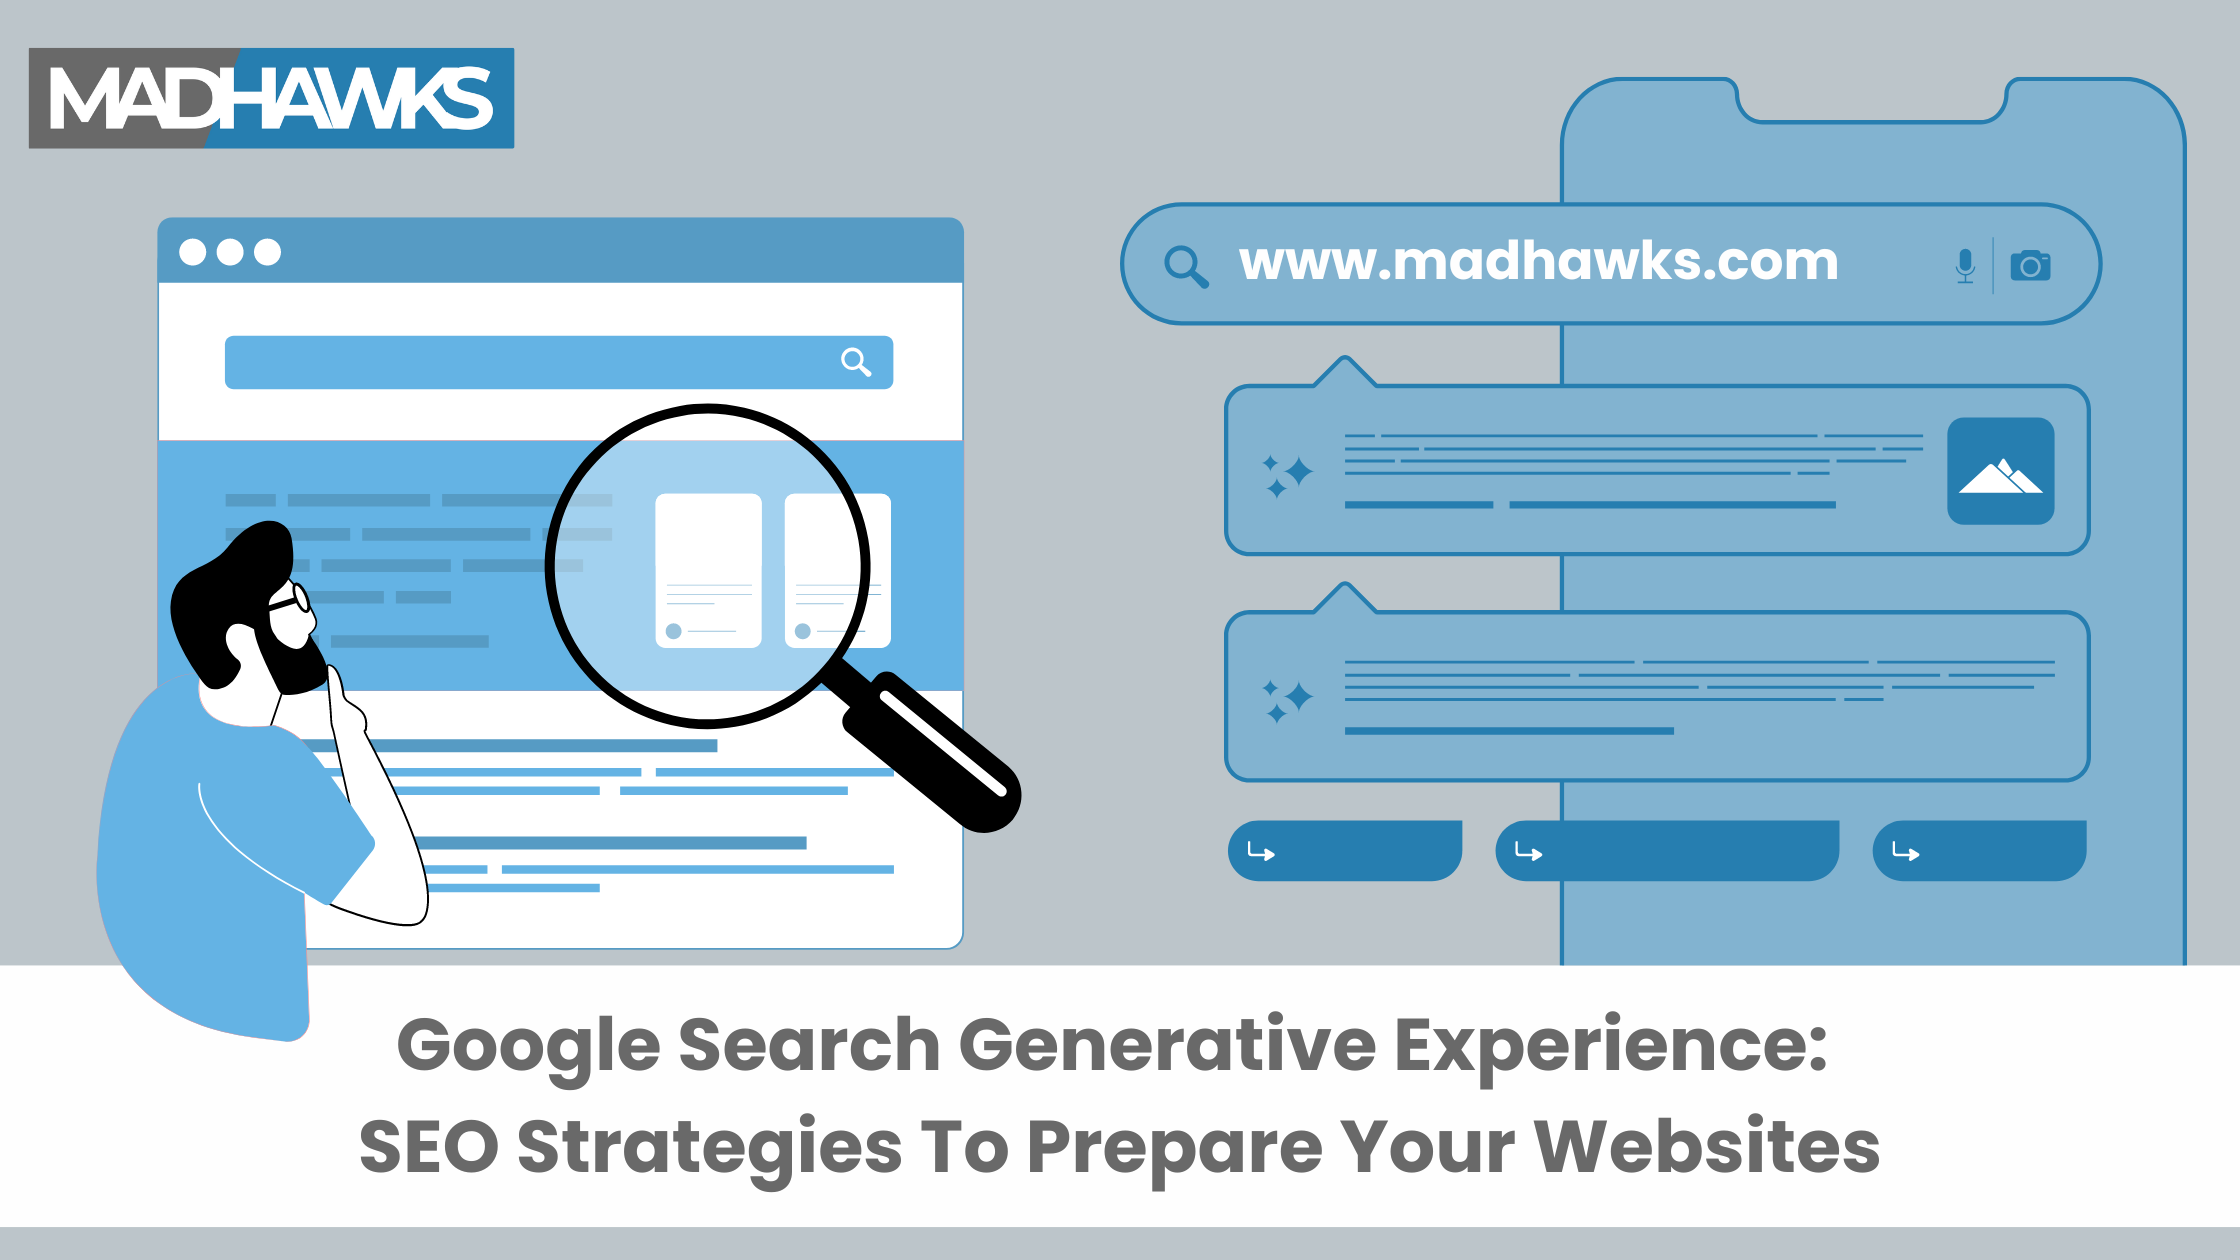 Google Search Generative Experience: SEO Strategies To Prepare Your Websites